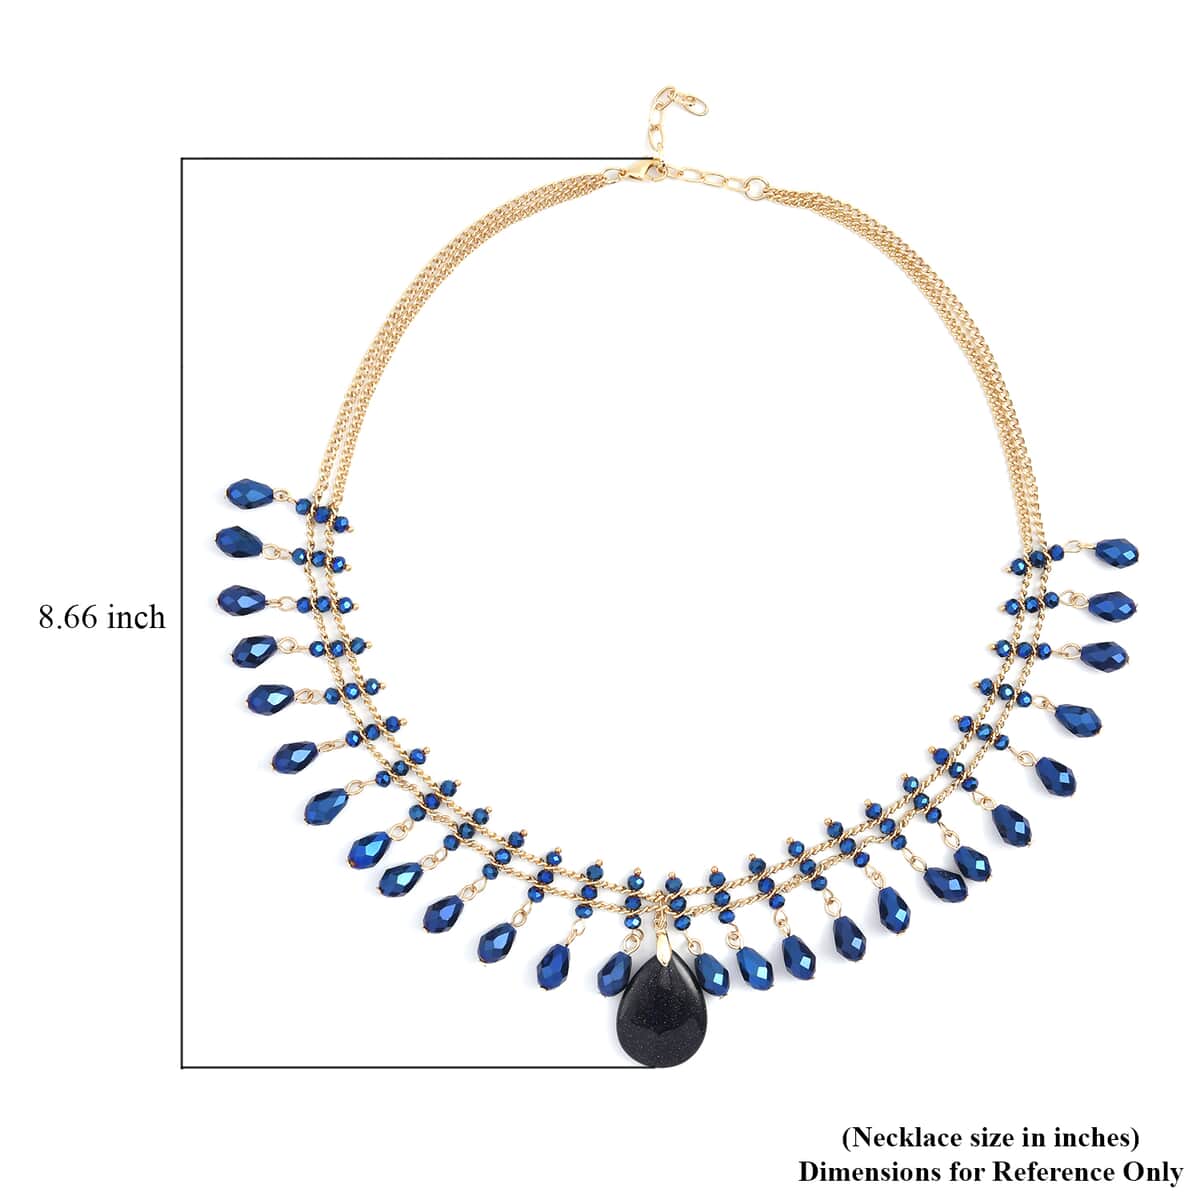 Buy Simulated Blue Sapphire, Black and Blue Austrian Crystal Crocodile  Necklace 21 Inches in Silvertone at ShopLC.